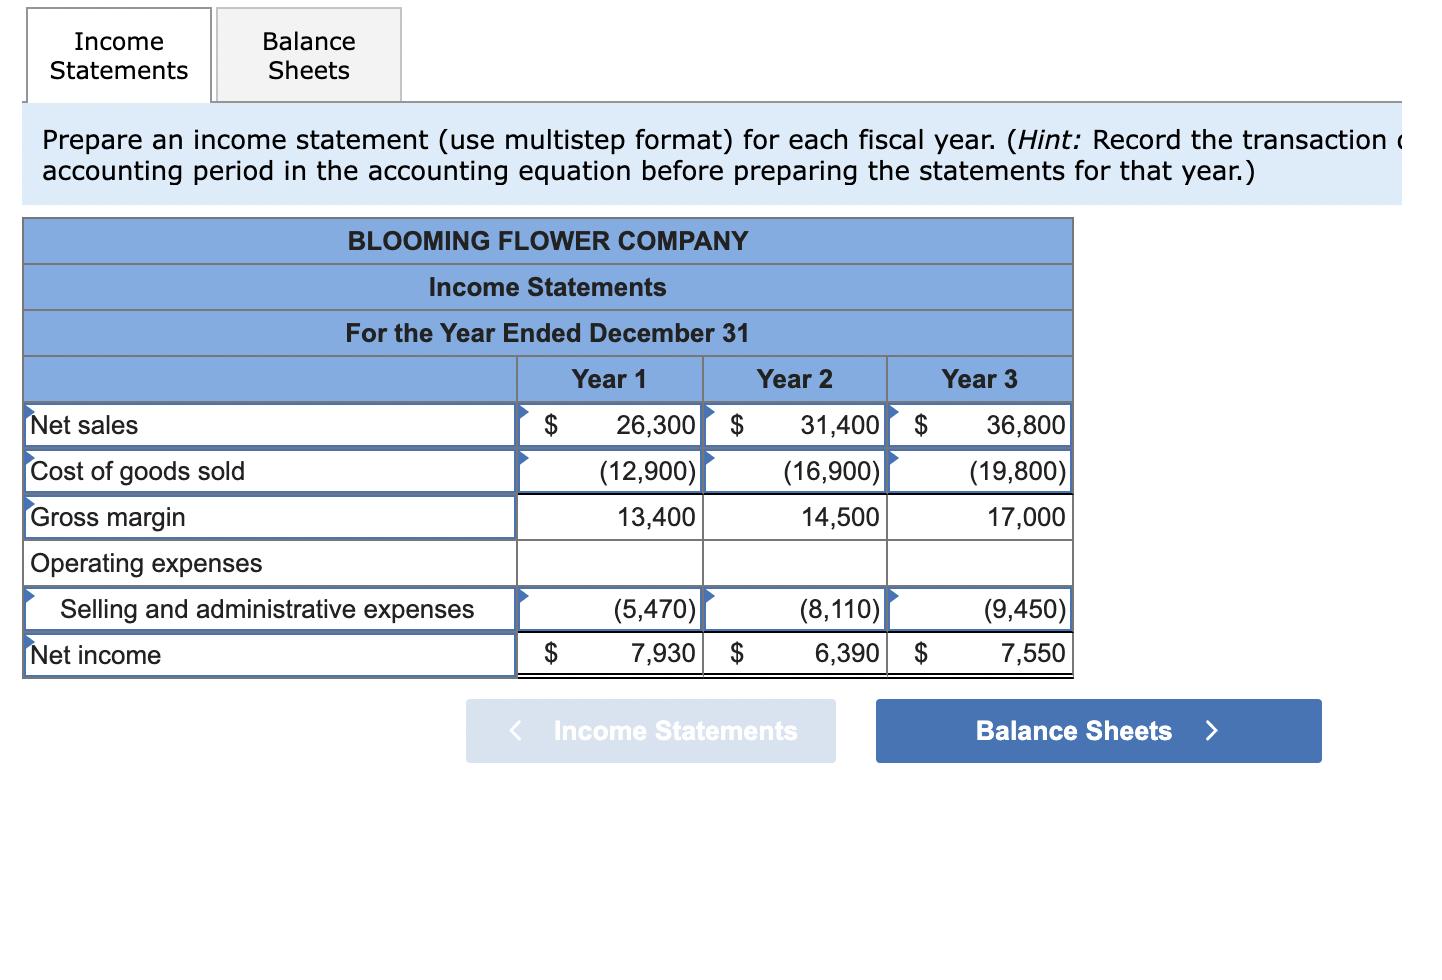 Income Statements Balance Sheets Prepare an income statement (use multistep format) for each fiscal year. (Hint: Record the t